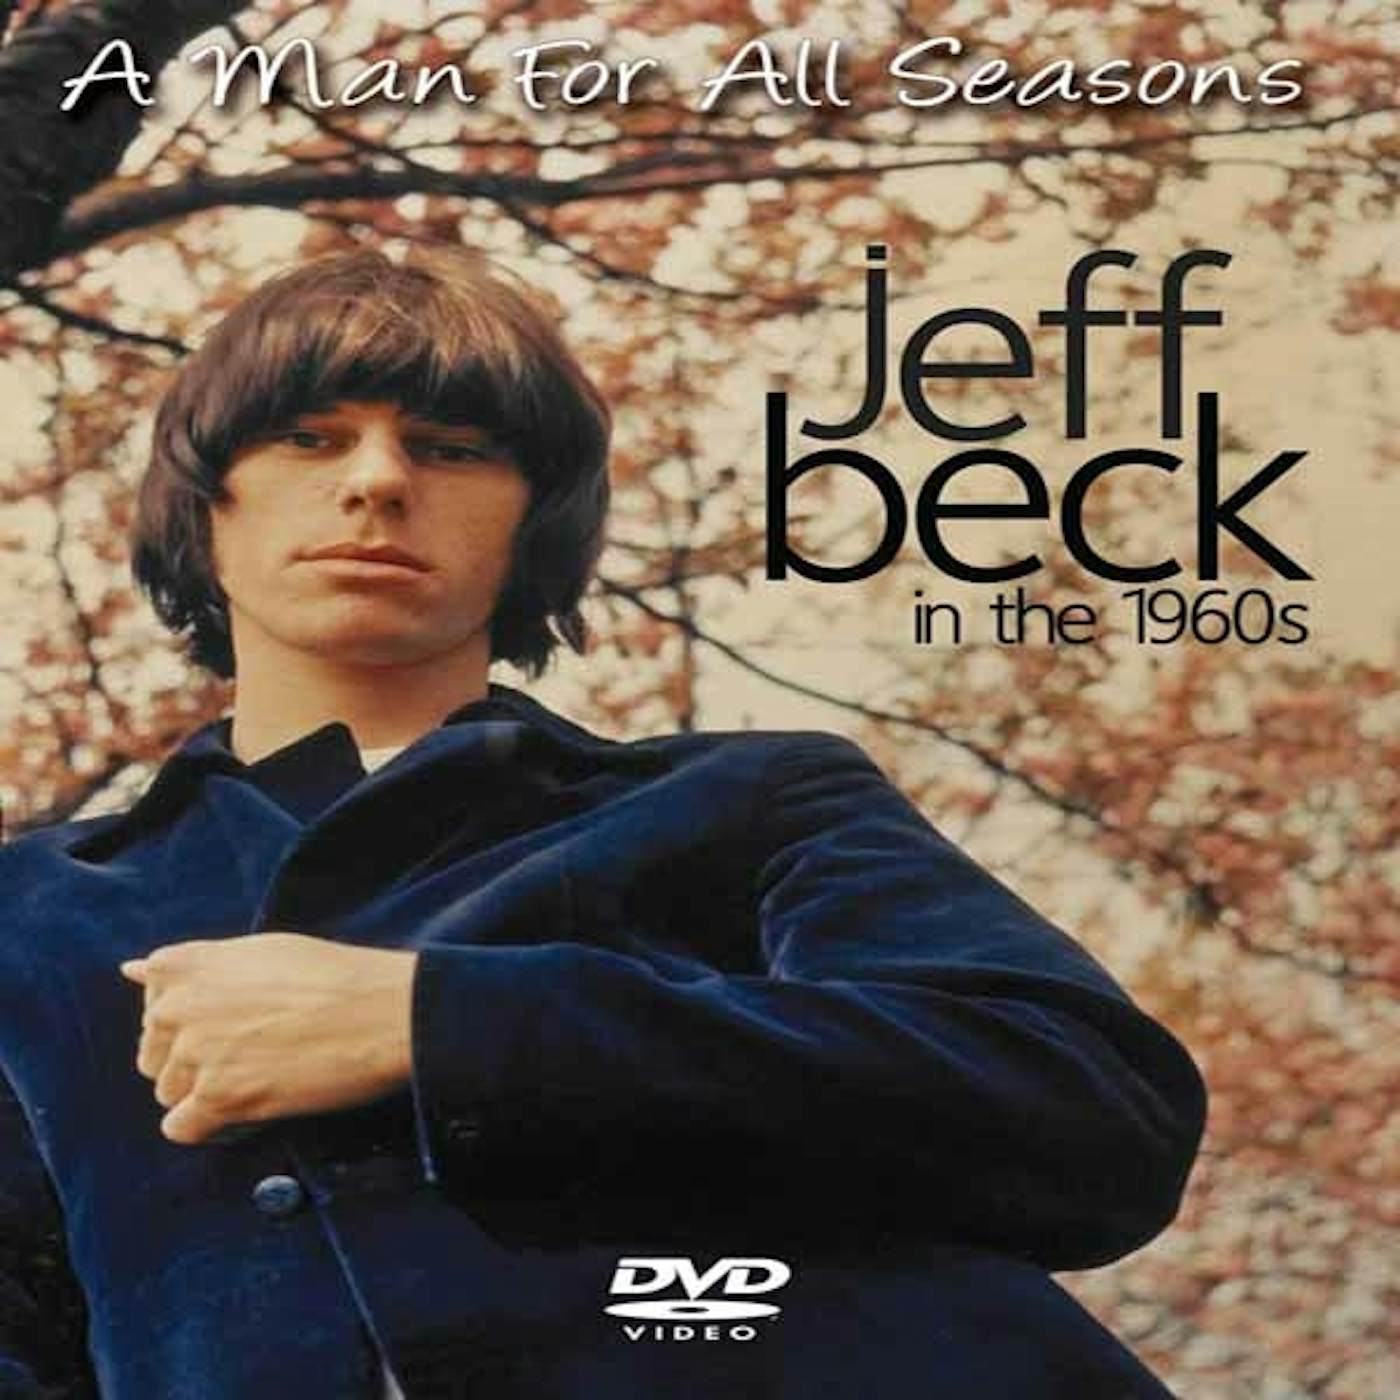 Jeff Beck DVD - A Man For All Seasons